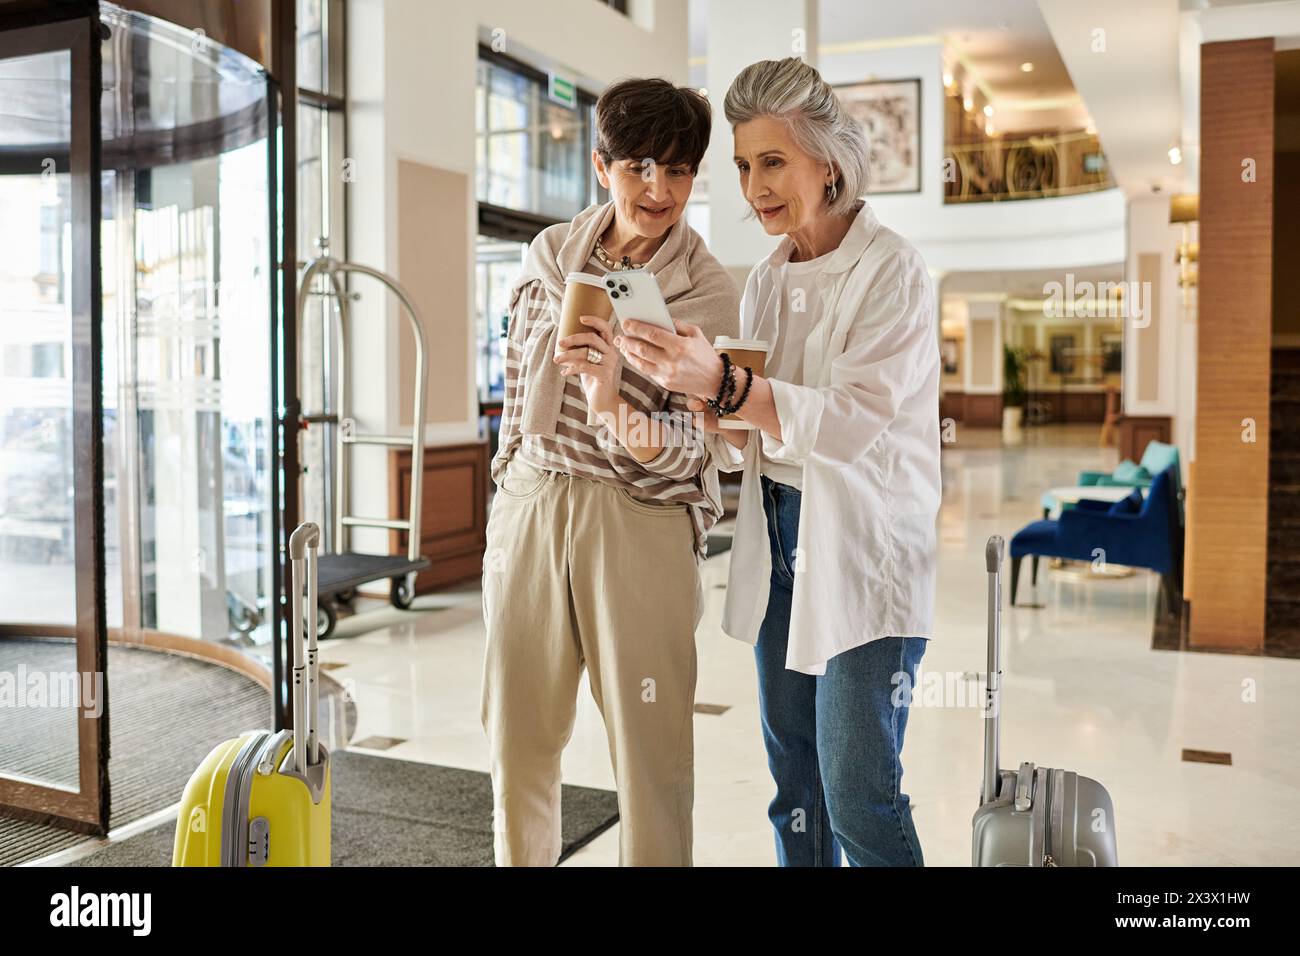 Two women, a loving senior lesbian couple, standing in a lobby engrossed in a cell phone. Stock Photo